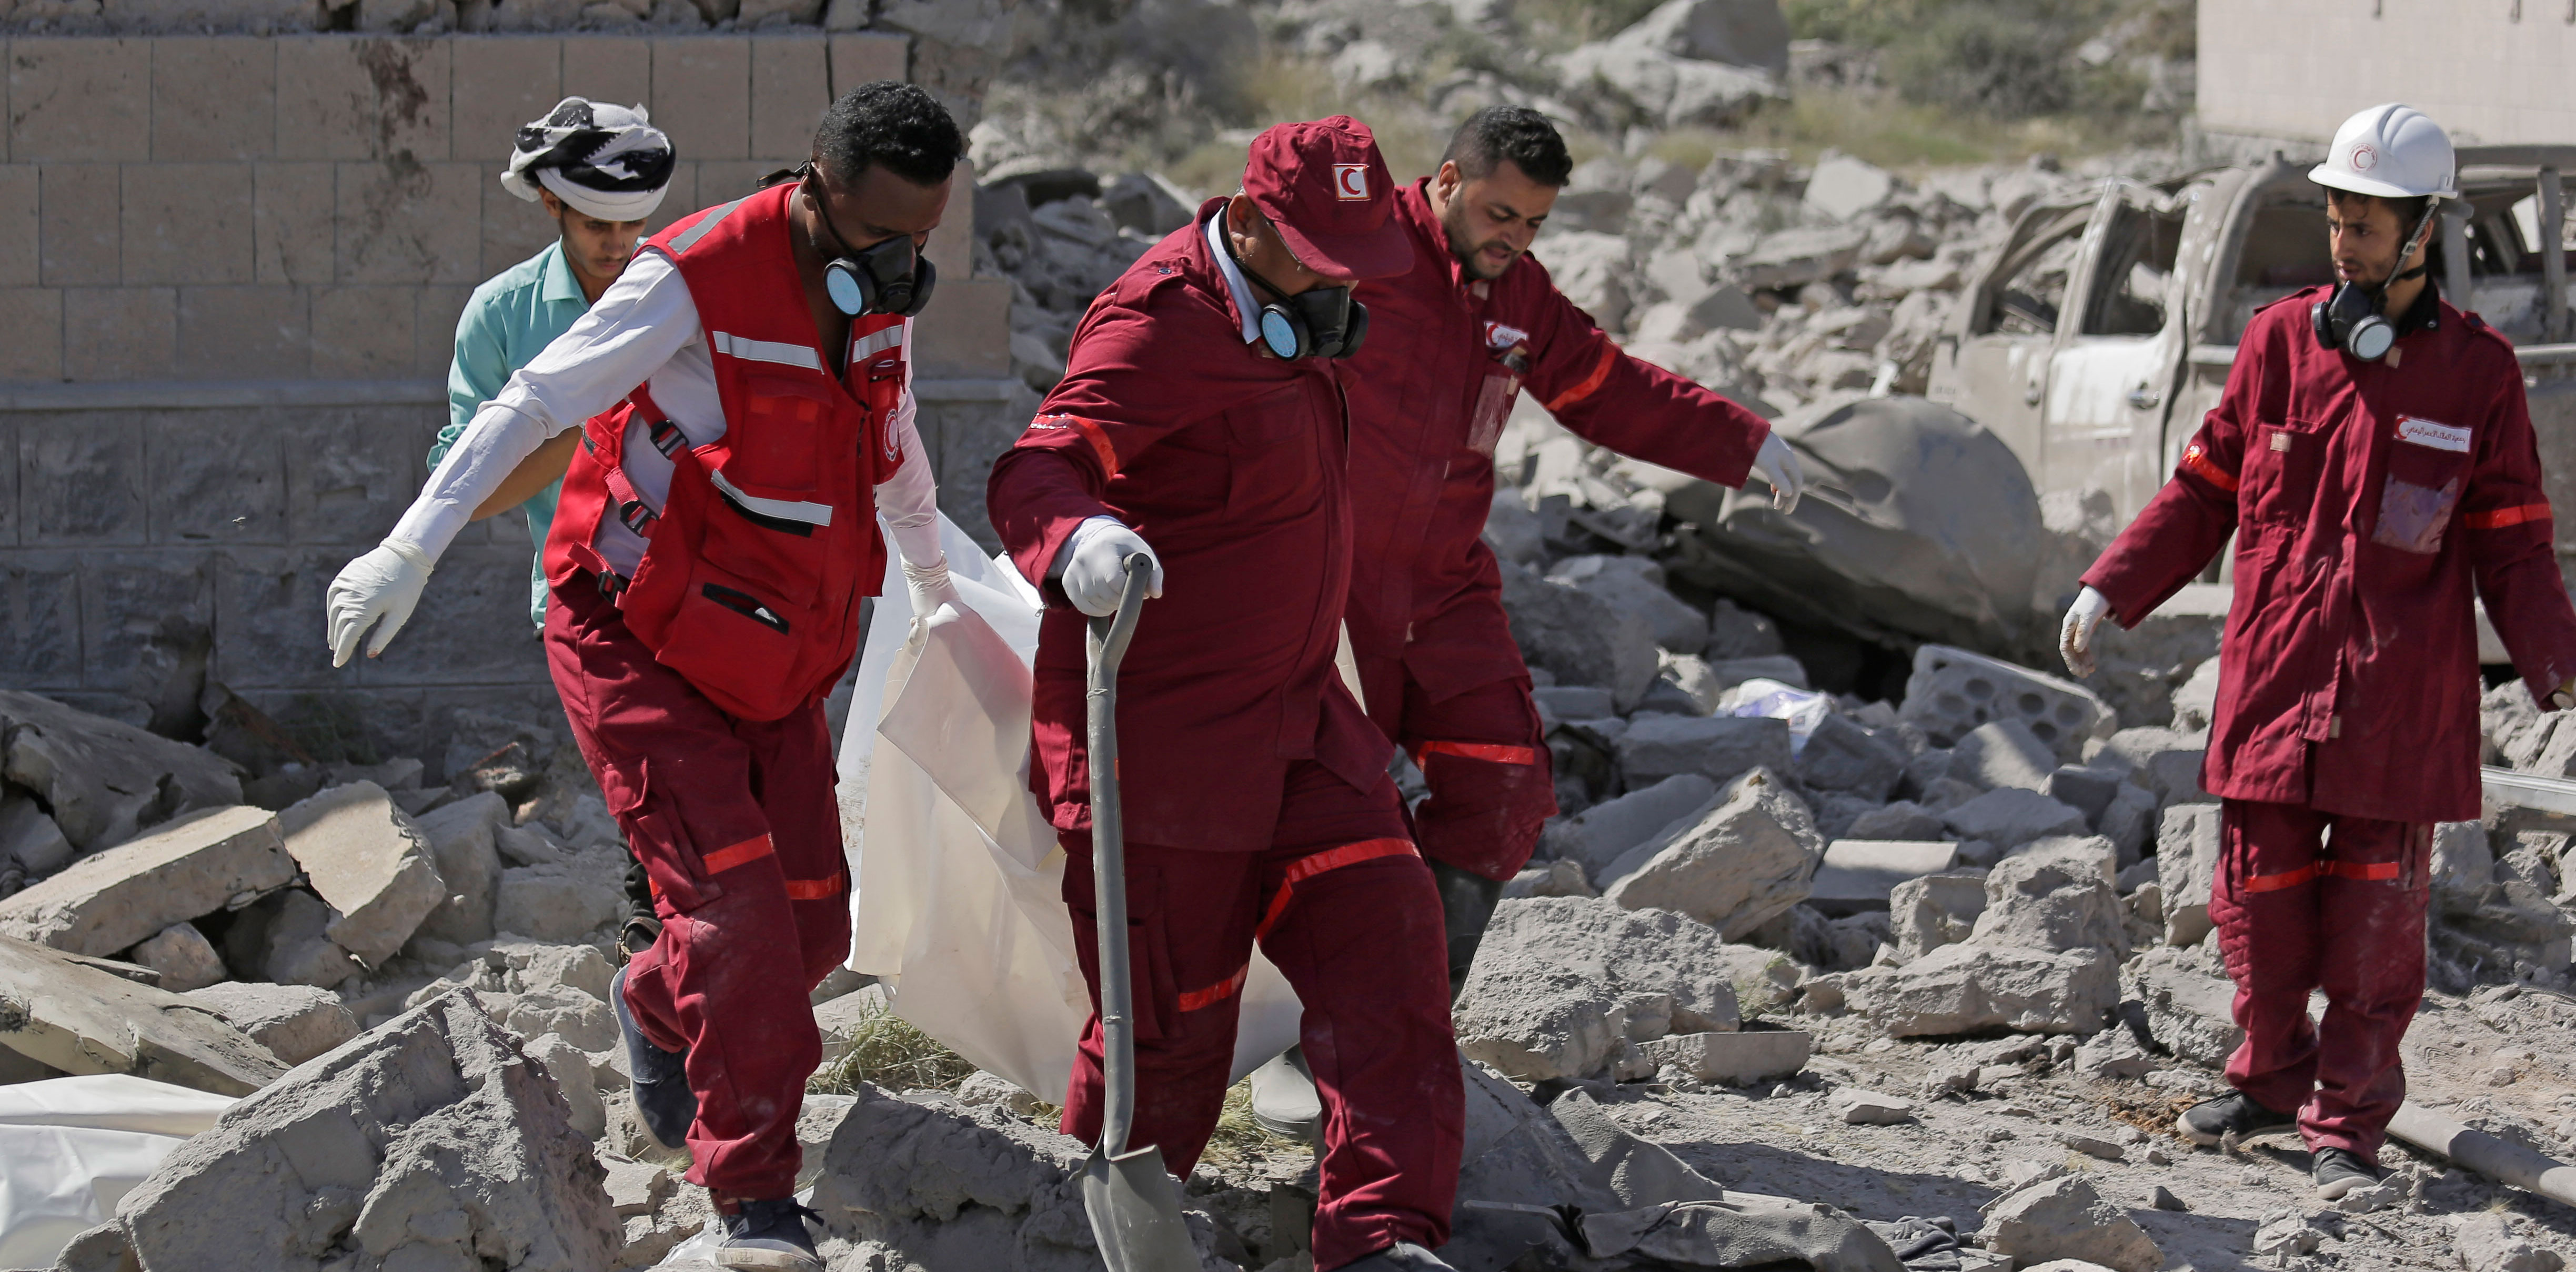 Rescue workers carry a body from a Houthi detention center destroyed by Saudi-led airstrikes that killed at least 60 people and wounding several dozen according to officials and the rebels' health ministry in Dhamar province, southwestern Yemen, on September 1, 2019.